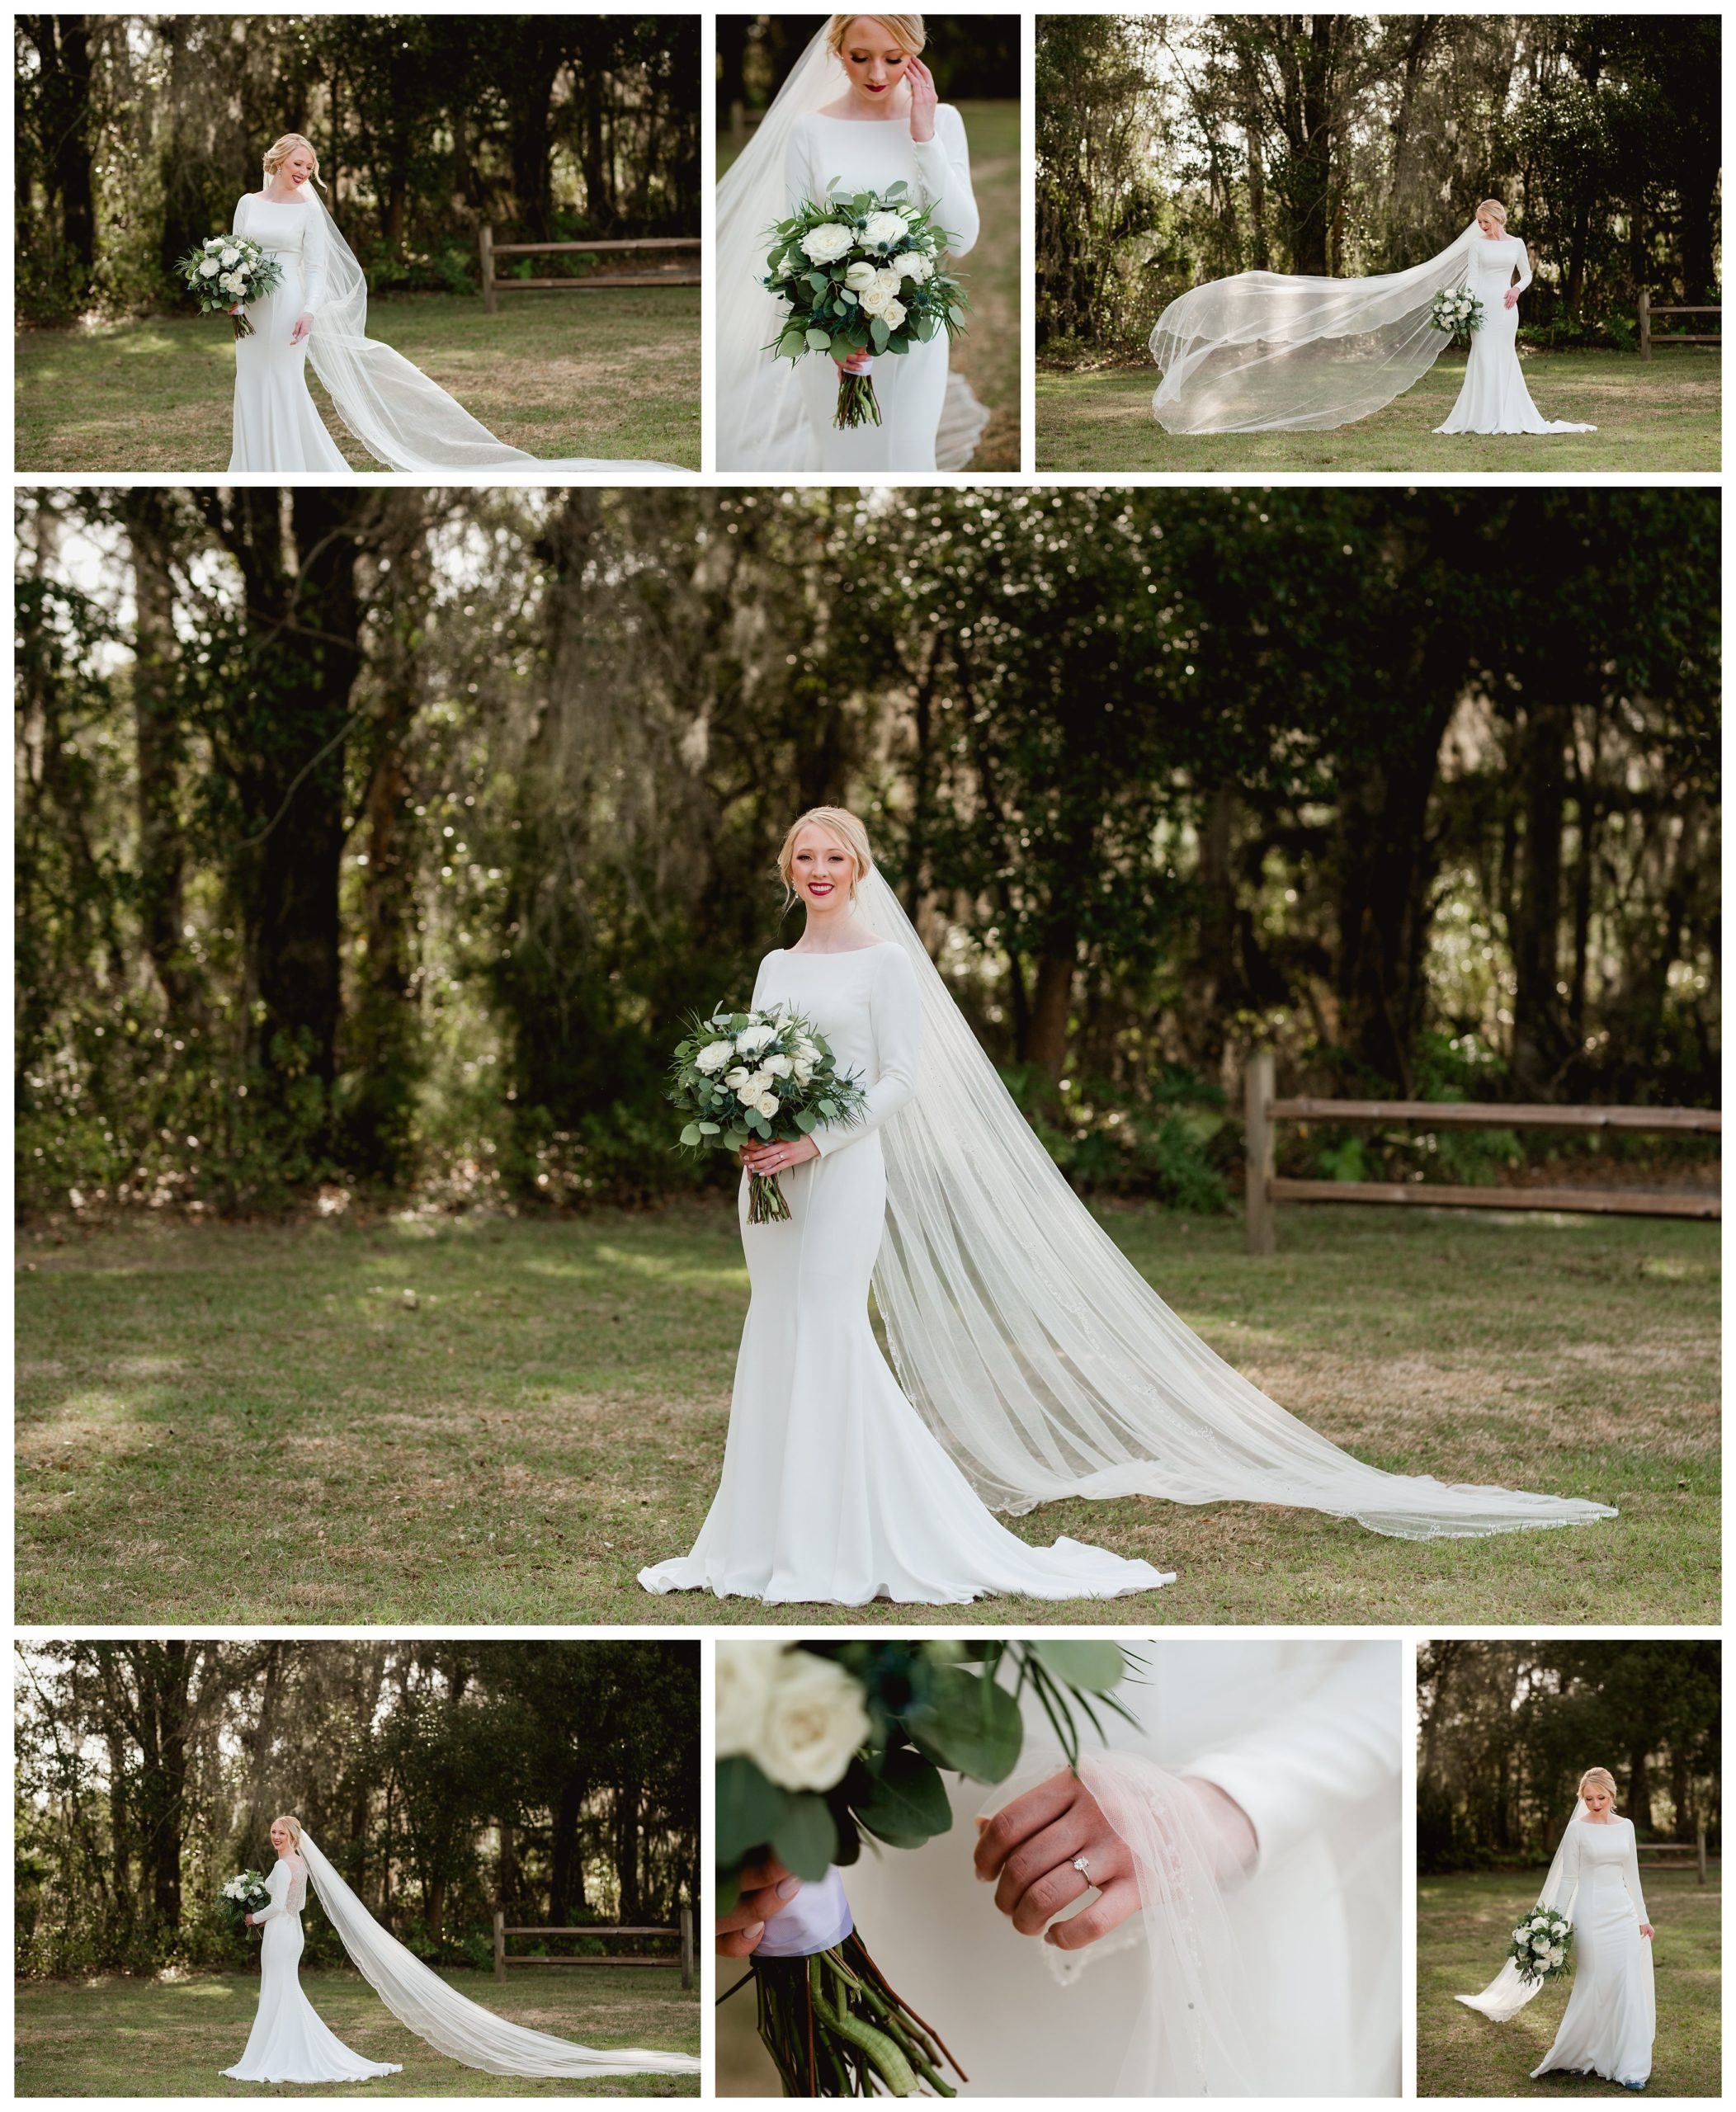 Bride posing ideas with a long veil - Shelly Williams Photography